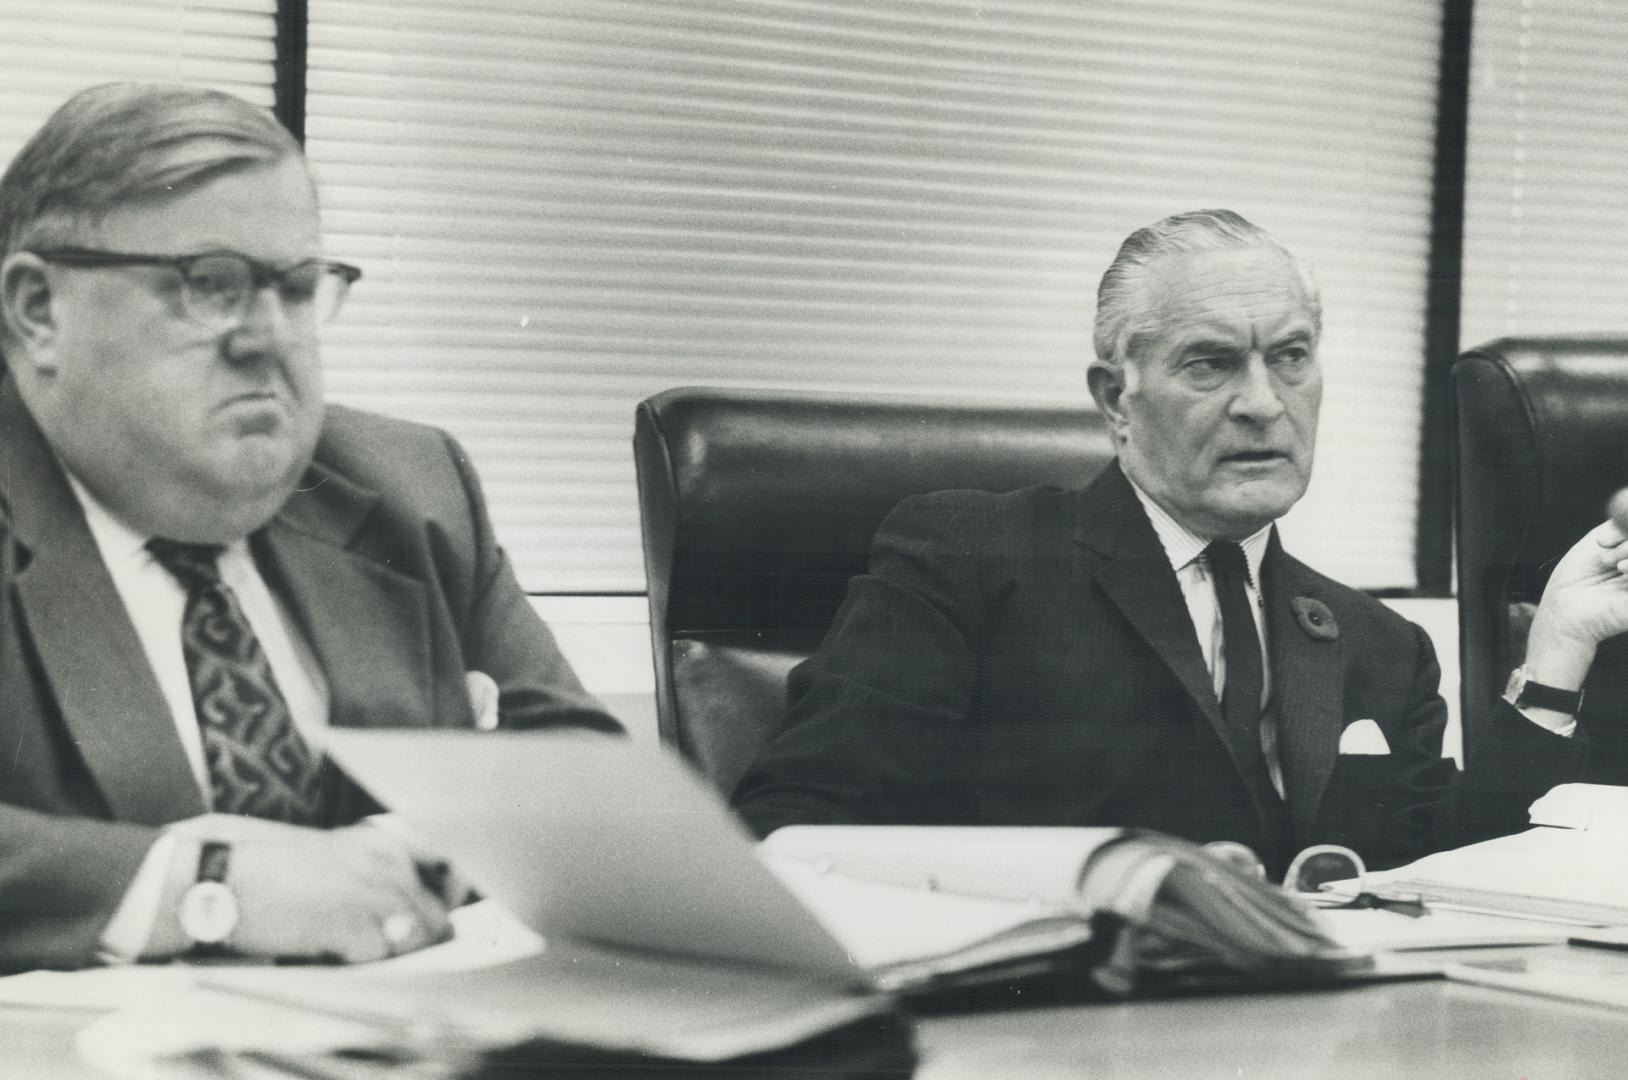 E.A. Royce (right) and Harry S. Bray (left)